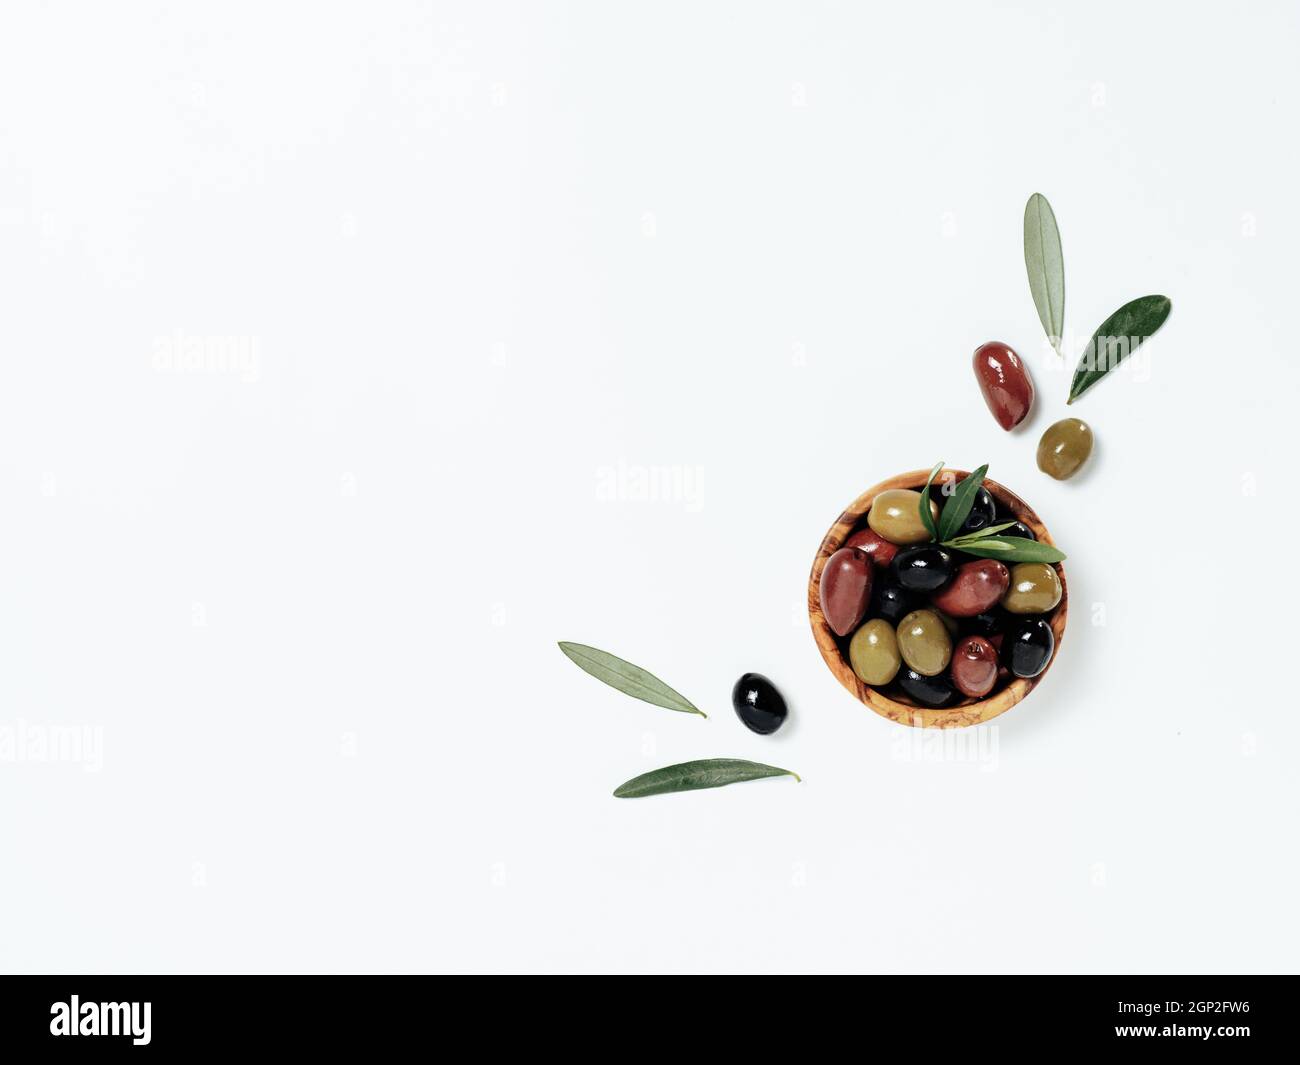 Olives tree leaves and fruits on white background. Small bowl with green, black and red kalamata olives, top view or flat lay. Olives isolated on whit Stock Photo